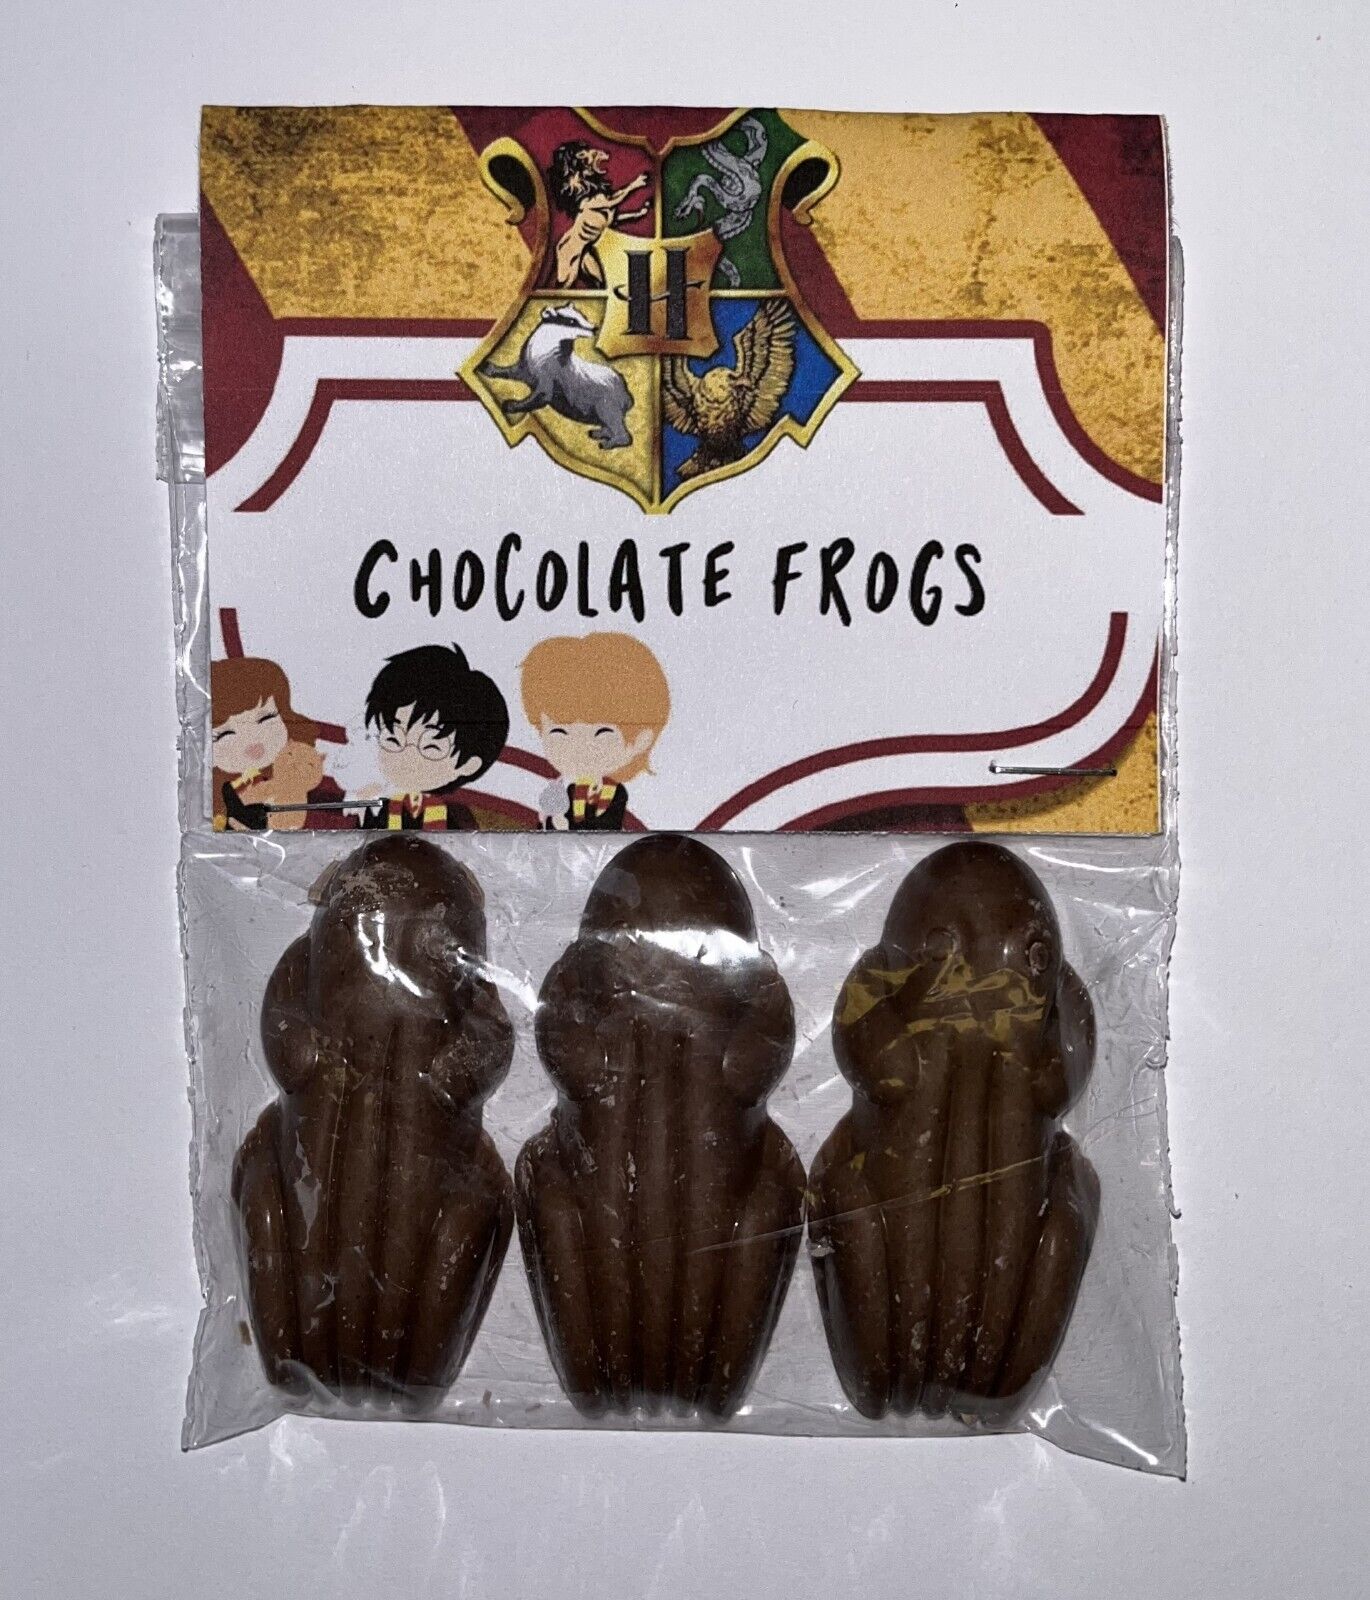 Harry Potter Wizard Sweet Treat Bag Party Favour Gift Snakes Coins Frogs Snails